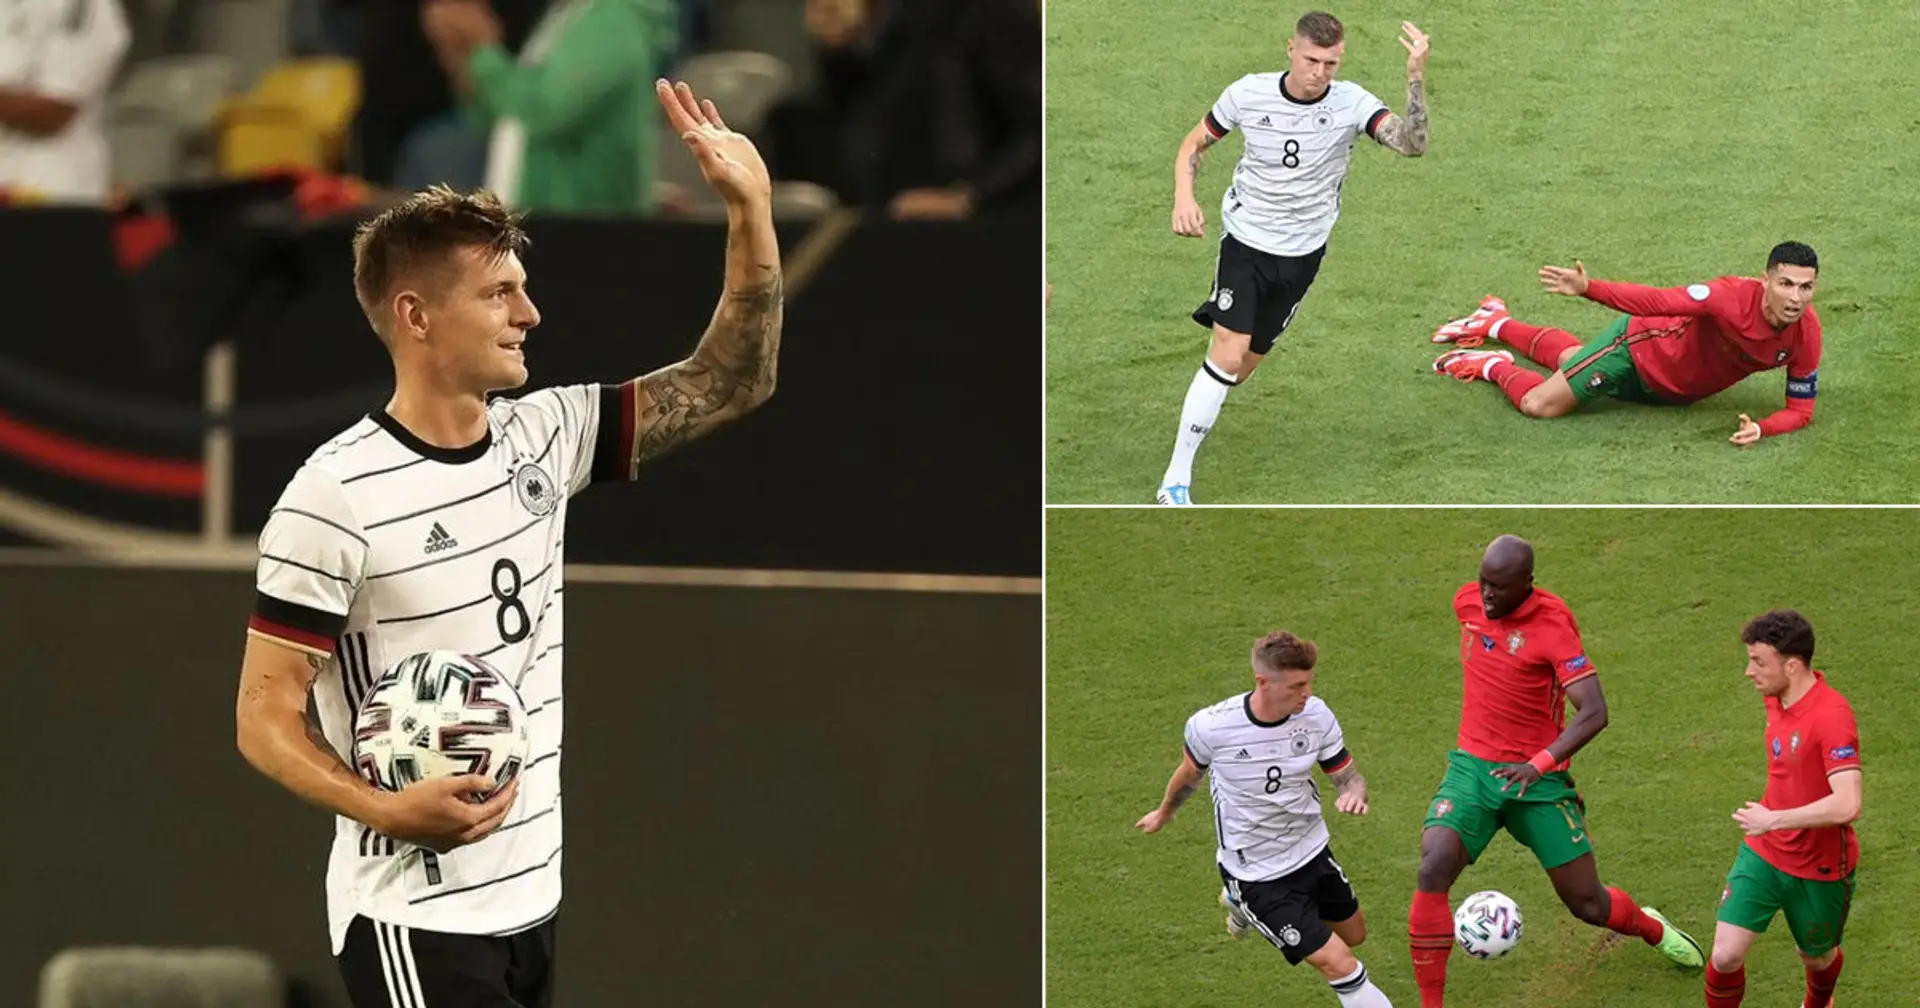 104 touches, 85 passes & more: Key numbers behind Toni Kroos dominant display v Portugal